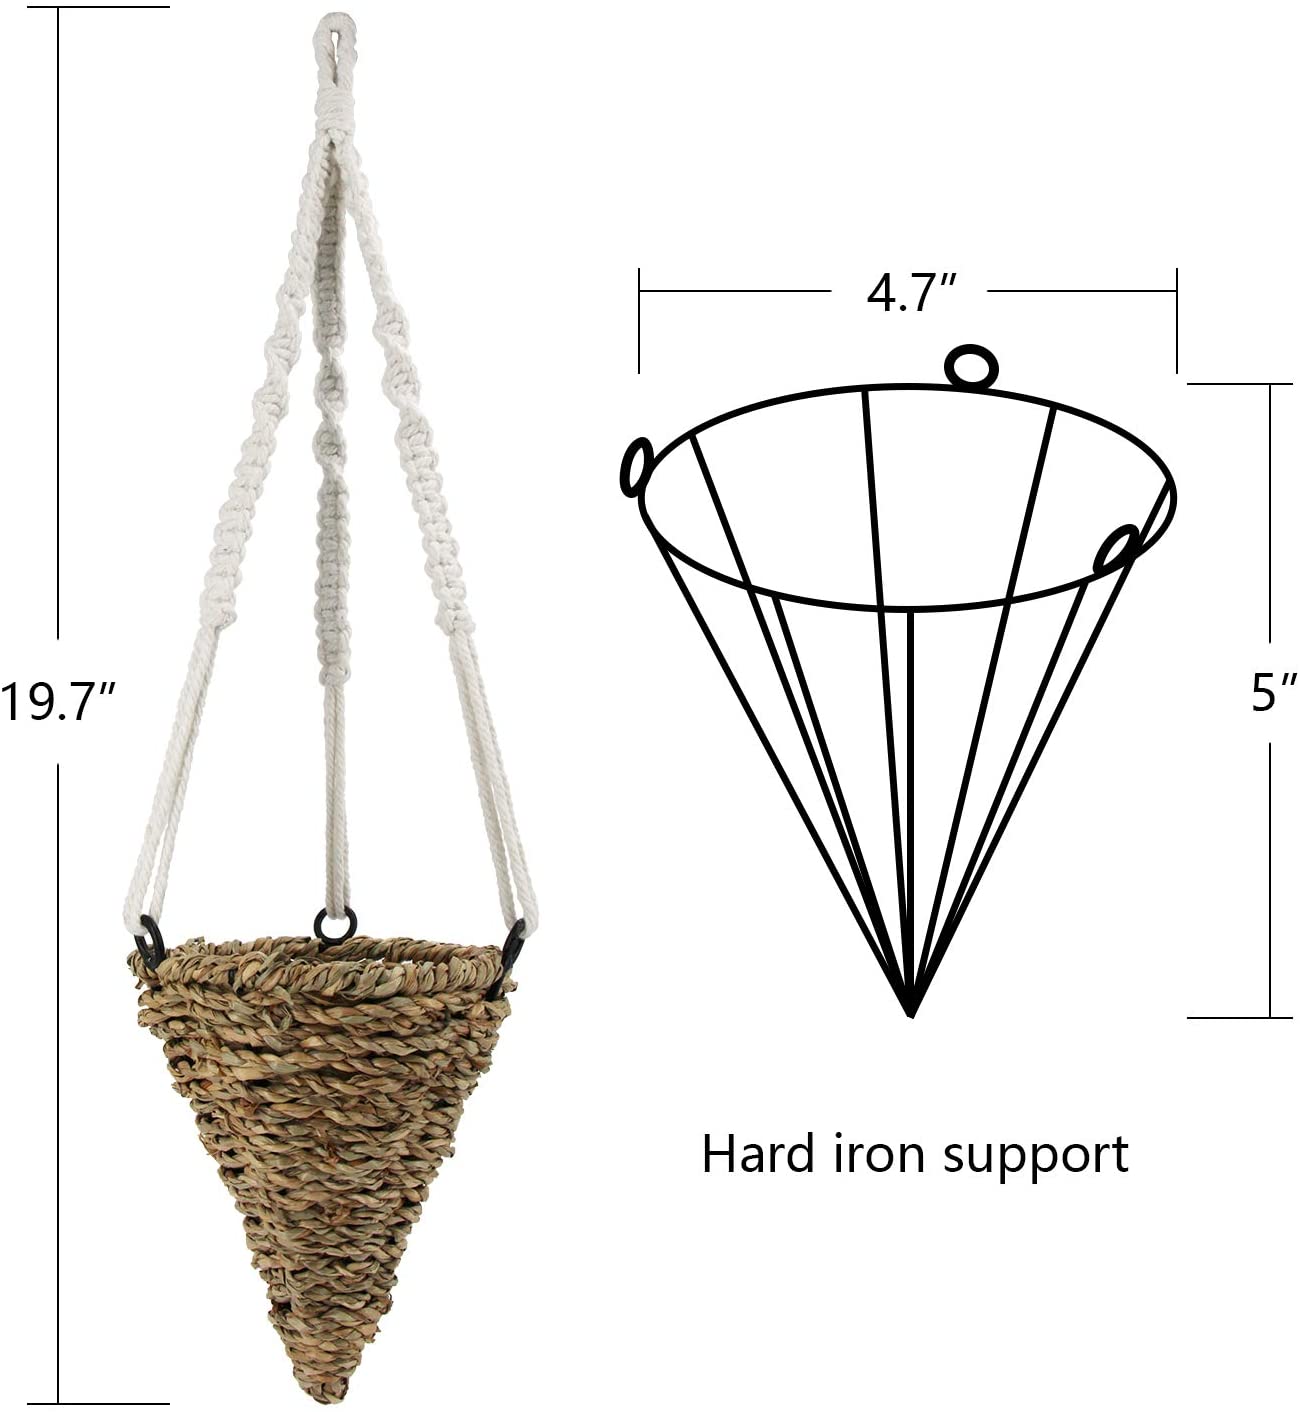 Drware 2 Pack Hanging Planter Basket, 4.7X 5 Inch Handmade Bamboo Hanging Basket, Indoor Plant Pots for Flowers Fake Plants, Iron Ring Fixed Woven Basket for Home Decor